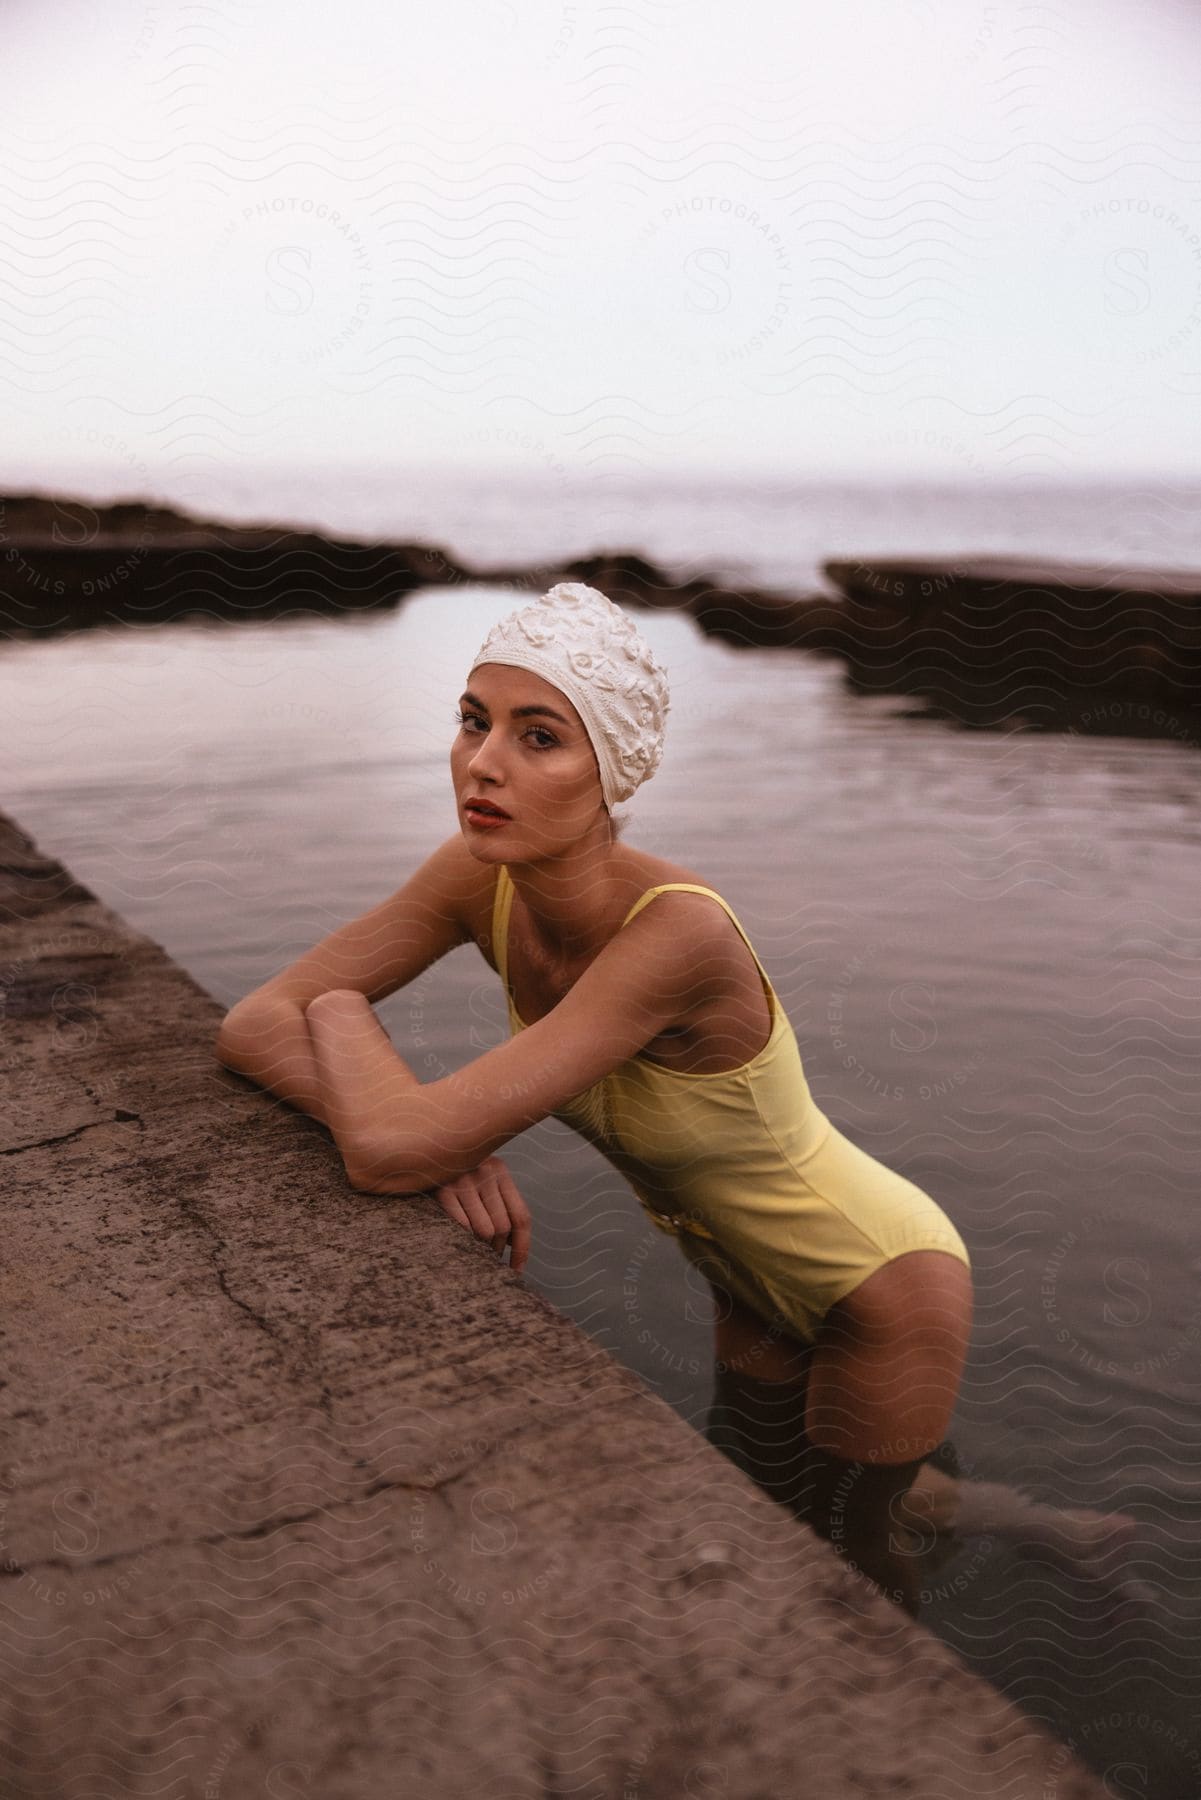 A woman in a yellow bathing suit leans on a concrete structure in thighdeep water